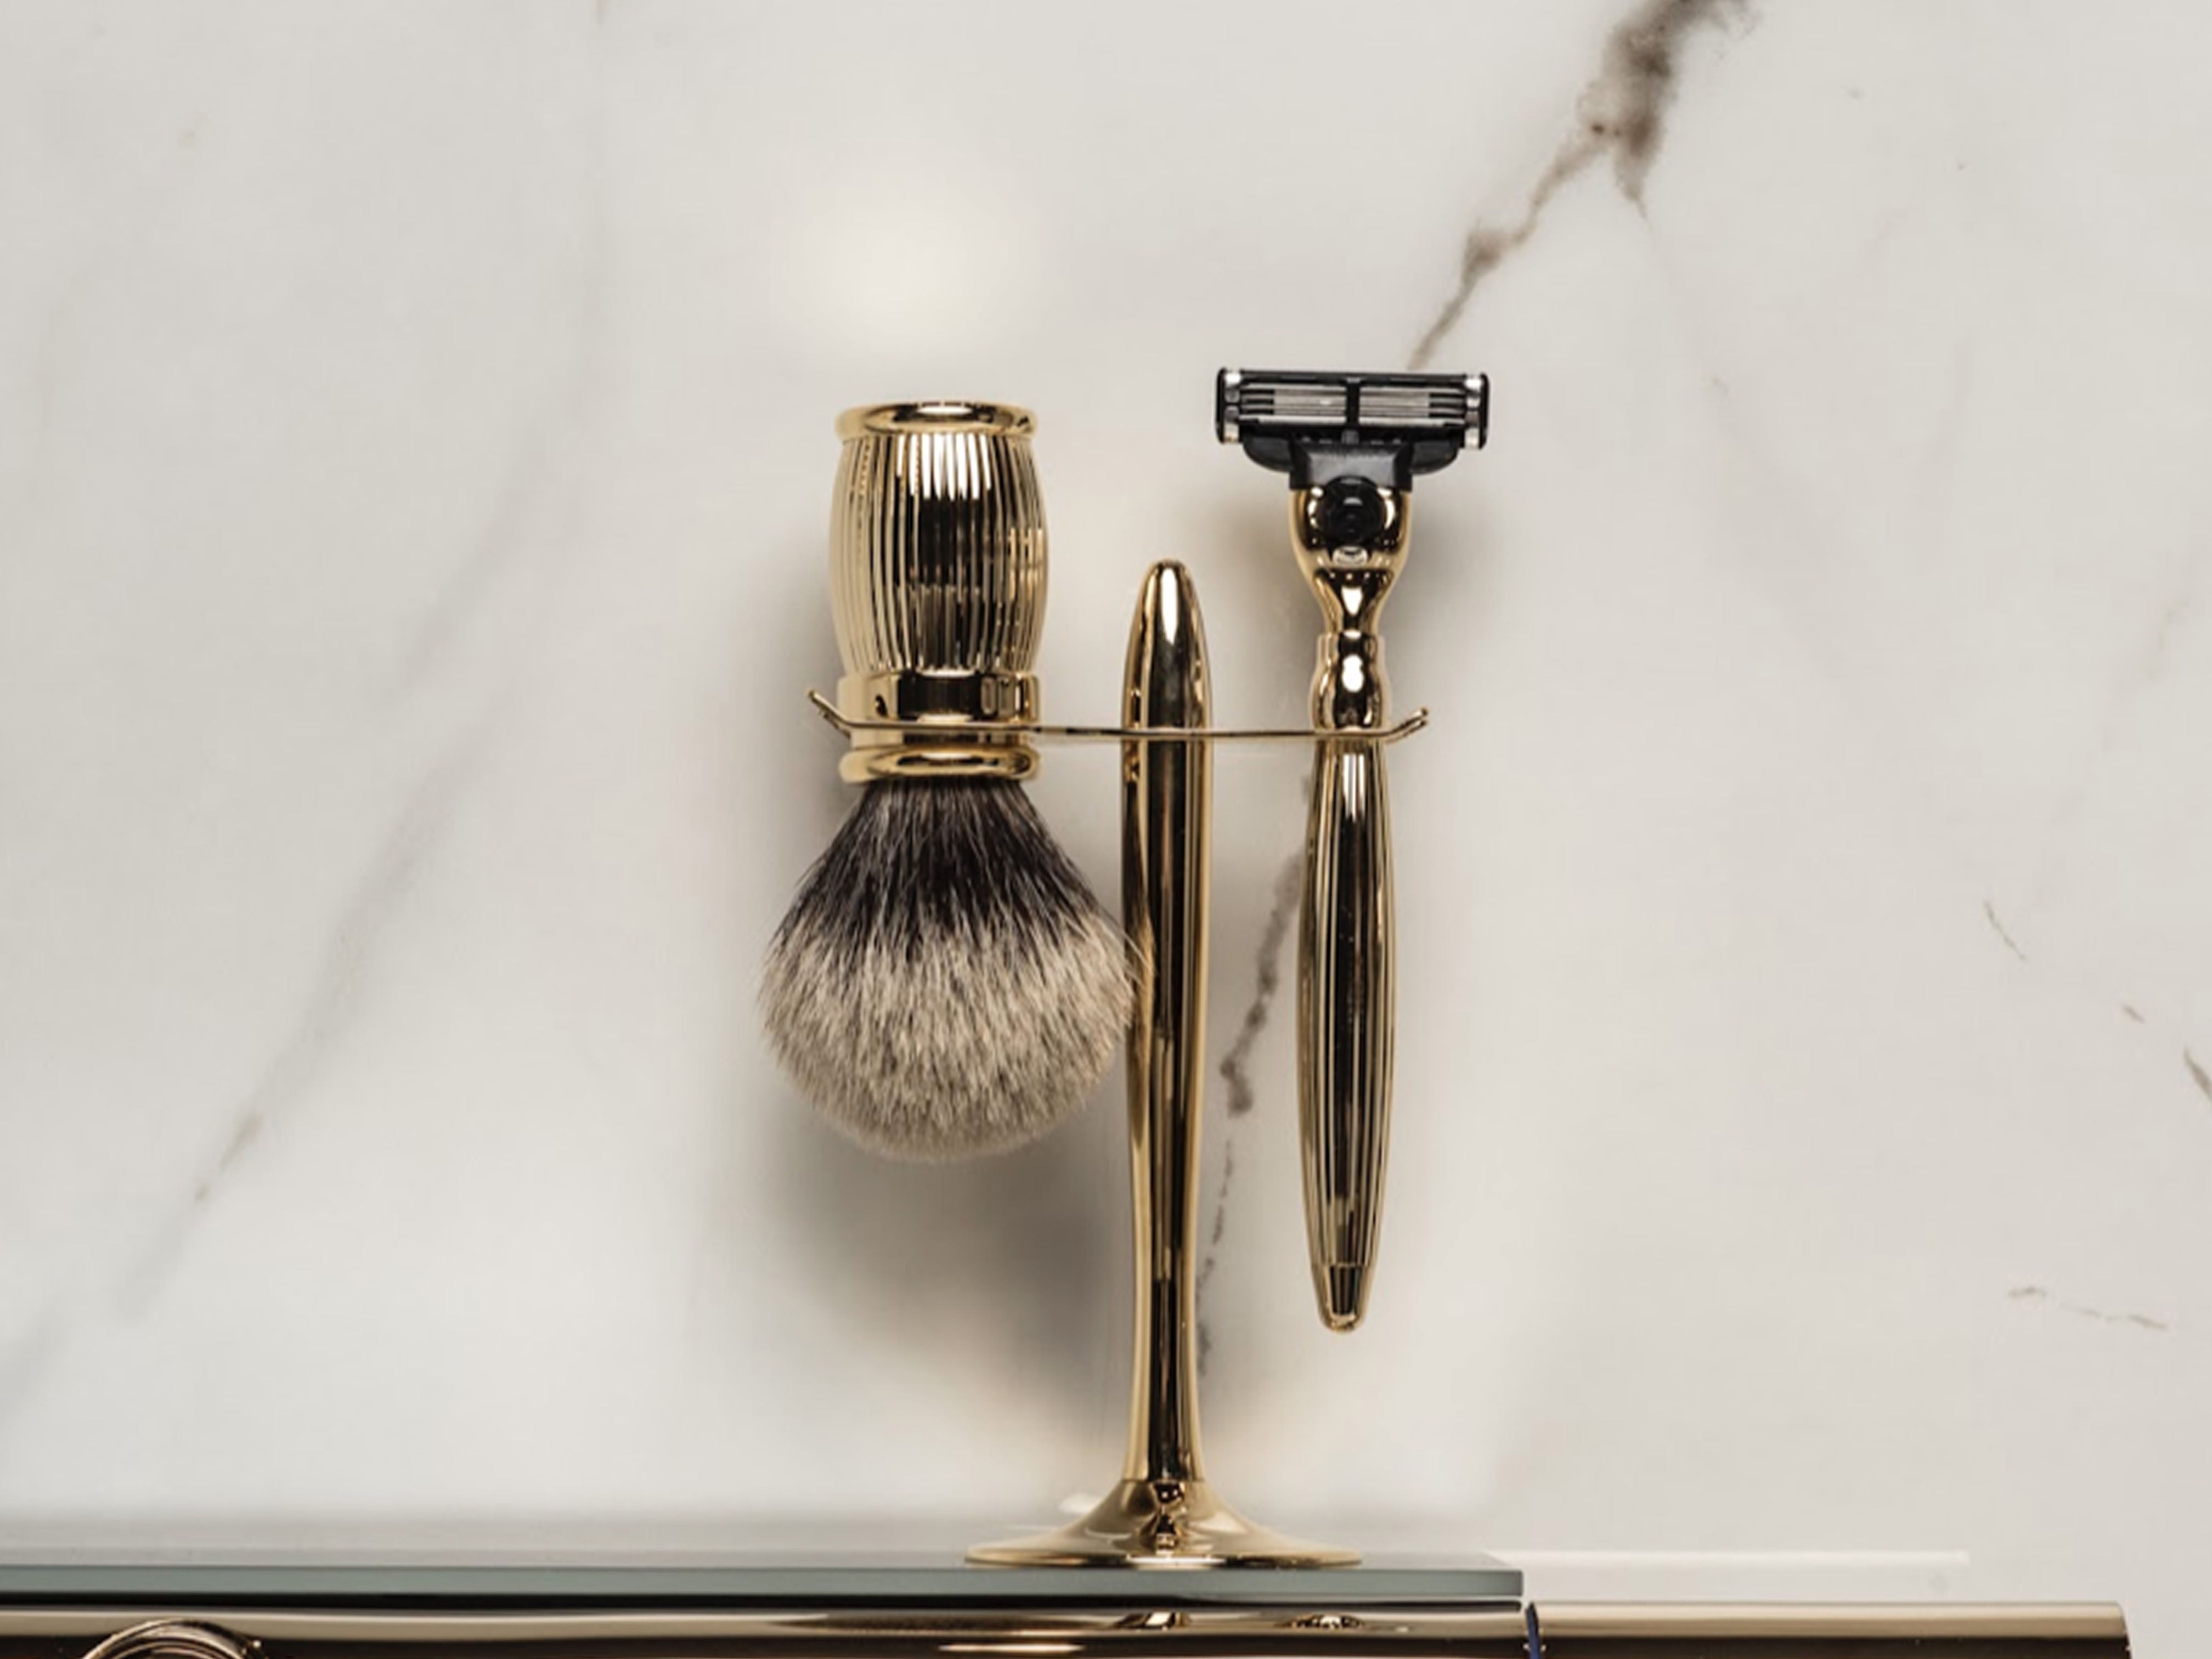 Razor and Brush on a stand with marble background